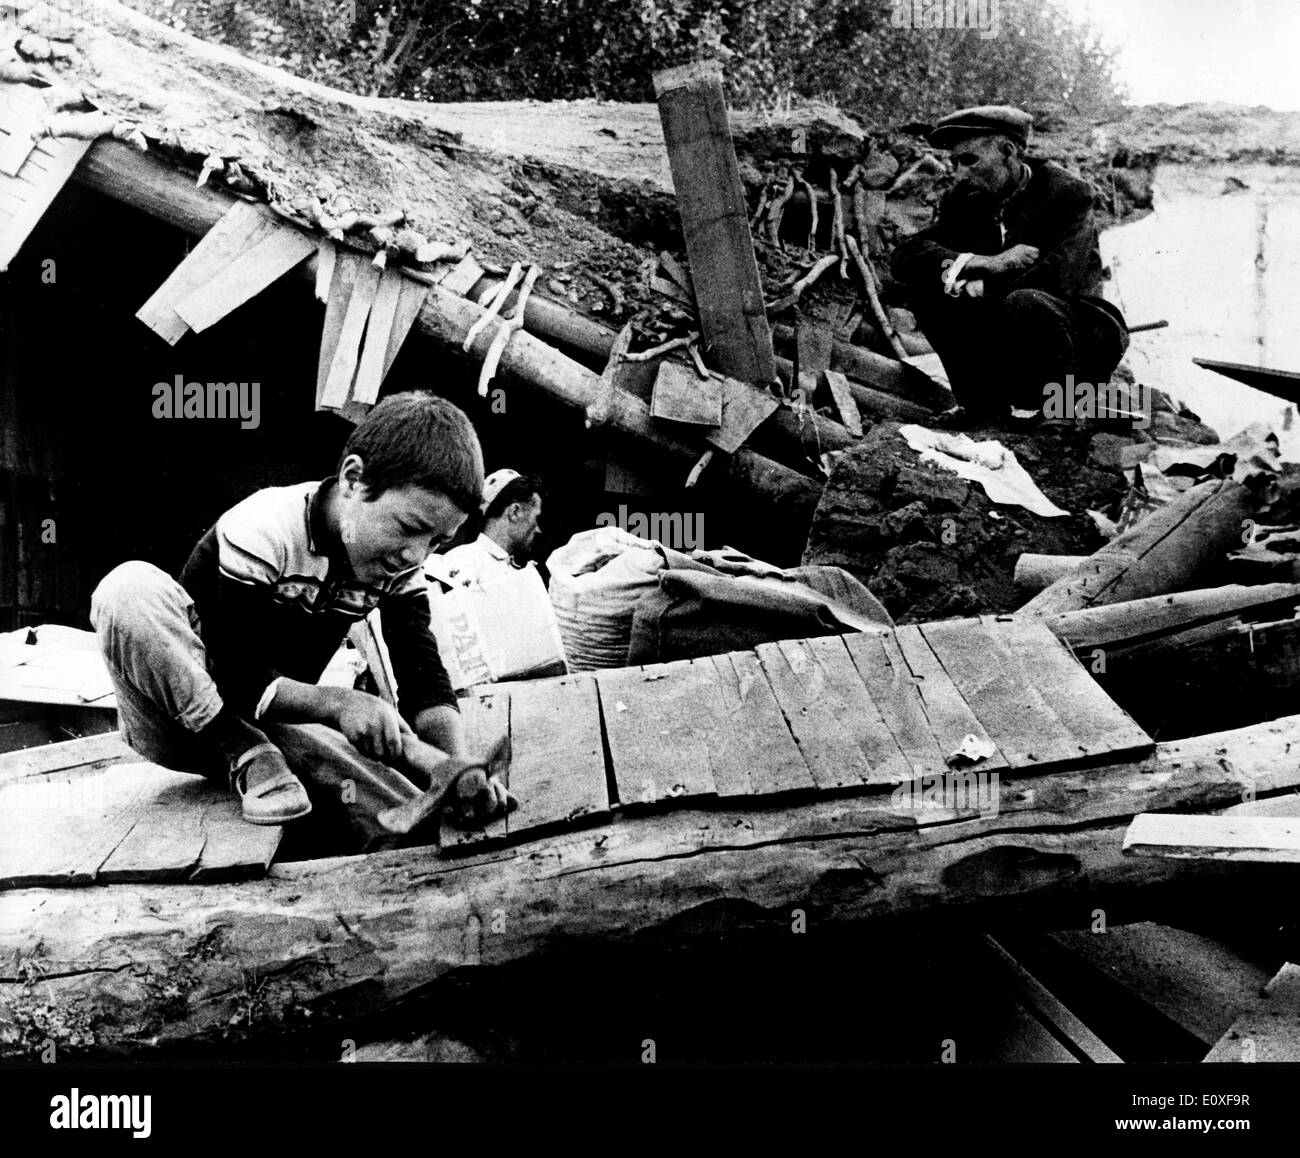 NATURAL DISASTERS: 1966 Earthquake in Turkey Stock Photo